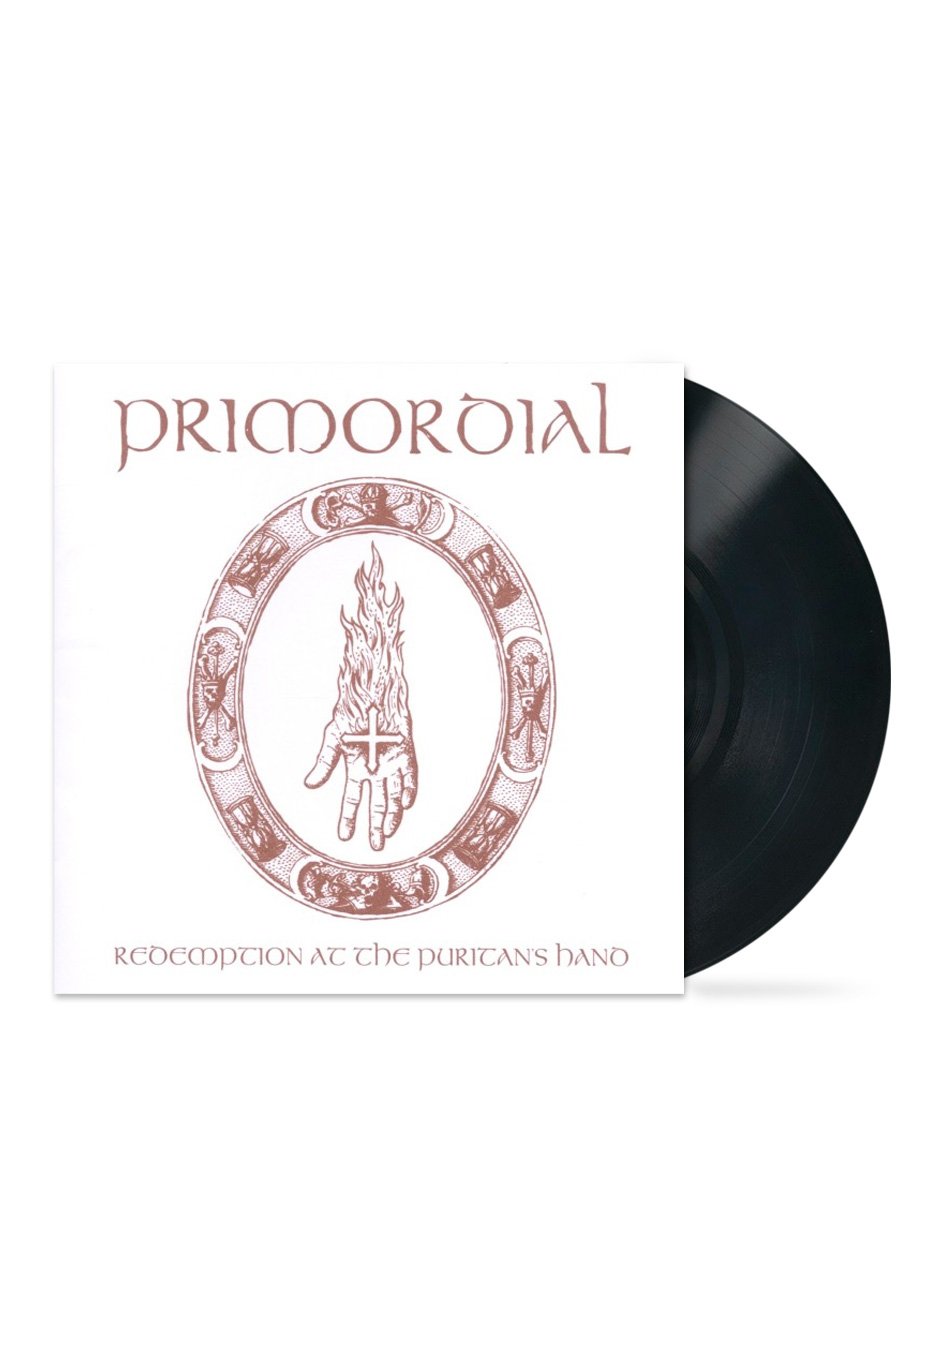 Primordial - Redemption At The Puritans Hand - Vinyl